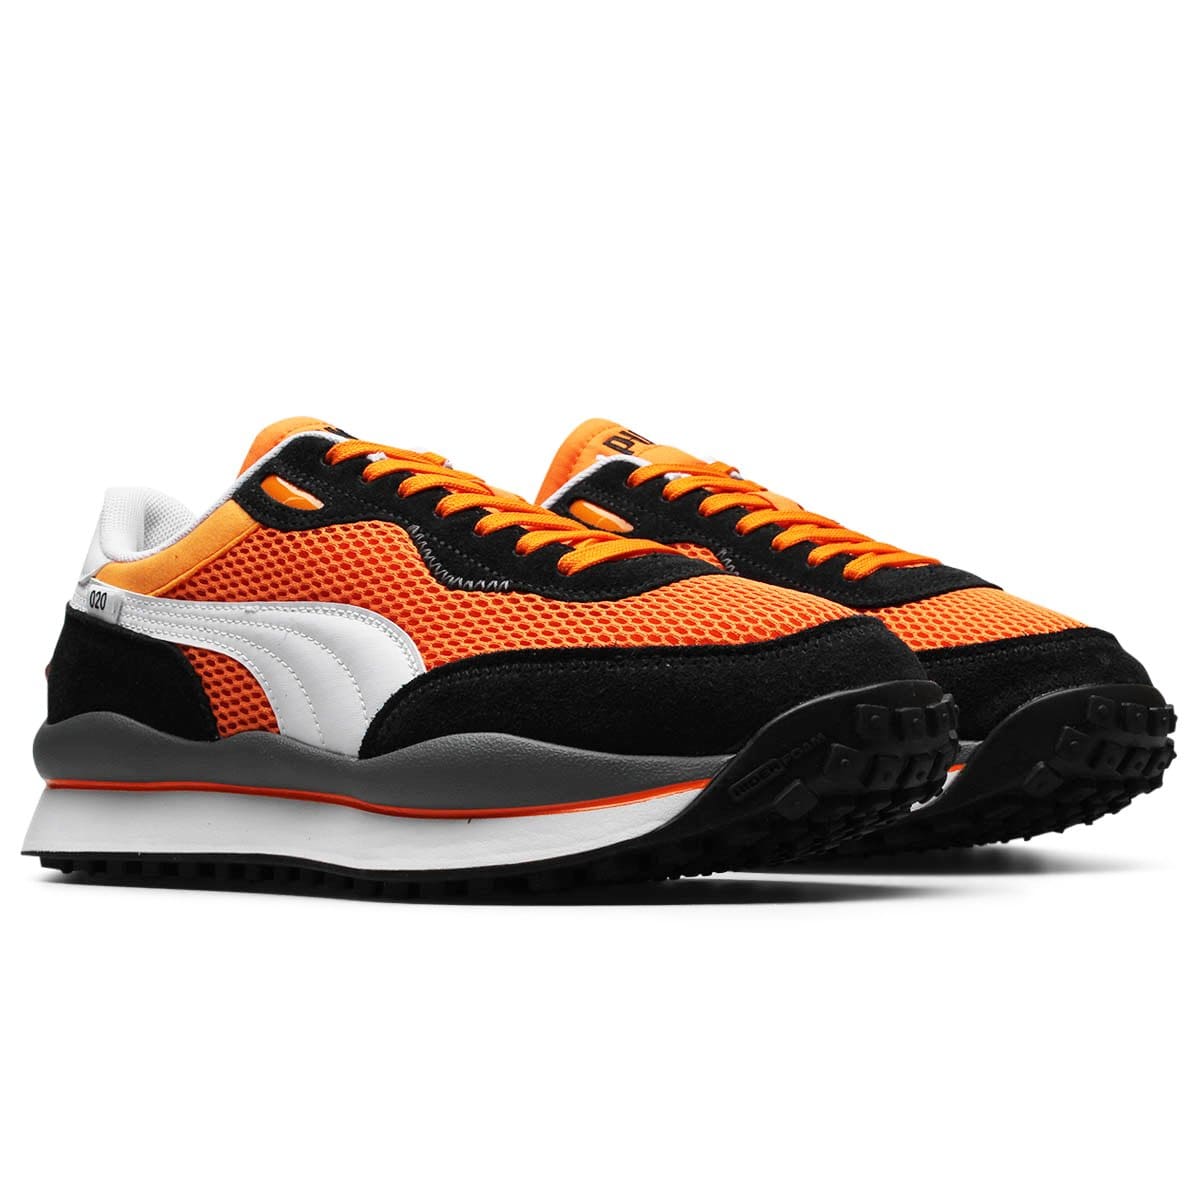 Puma Sneakers STYLE RIDER OG